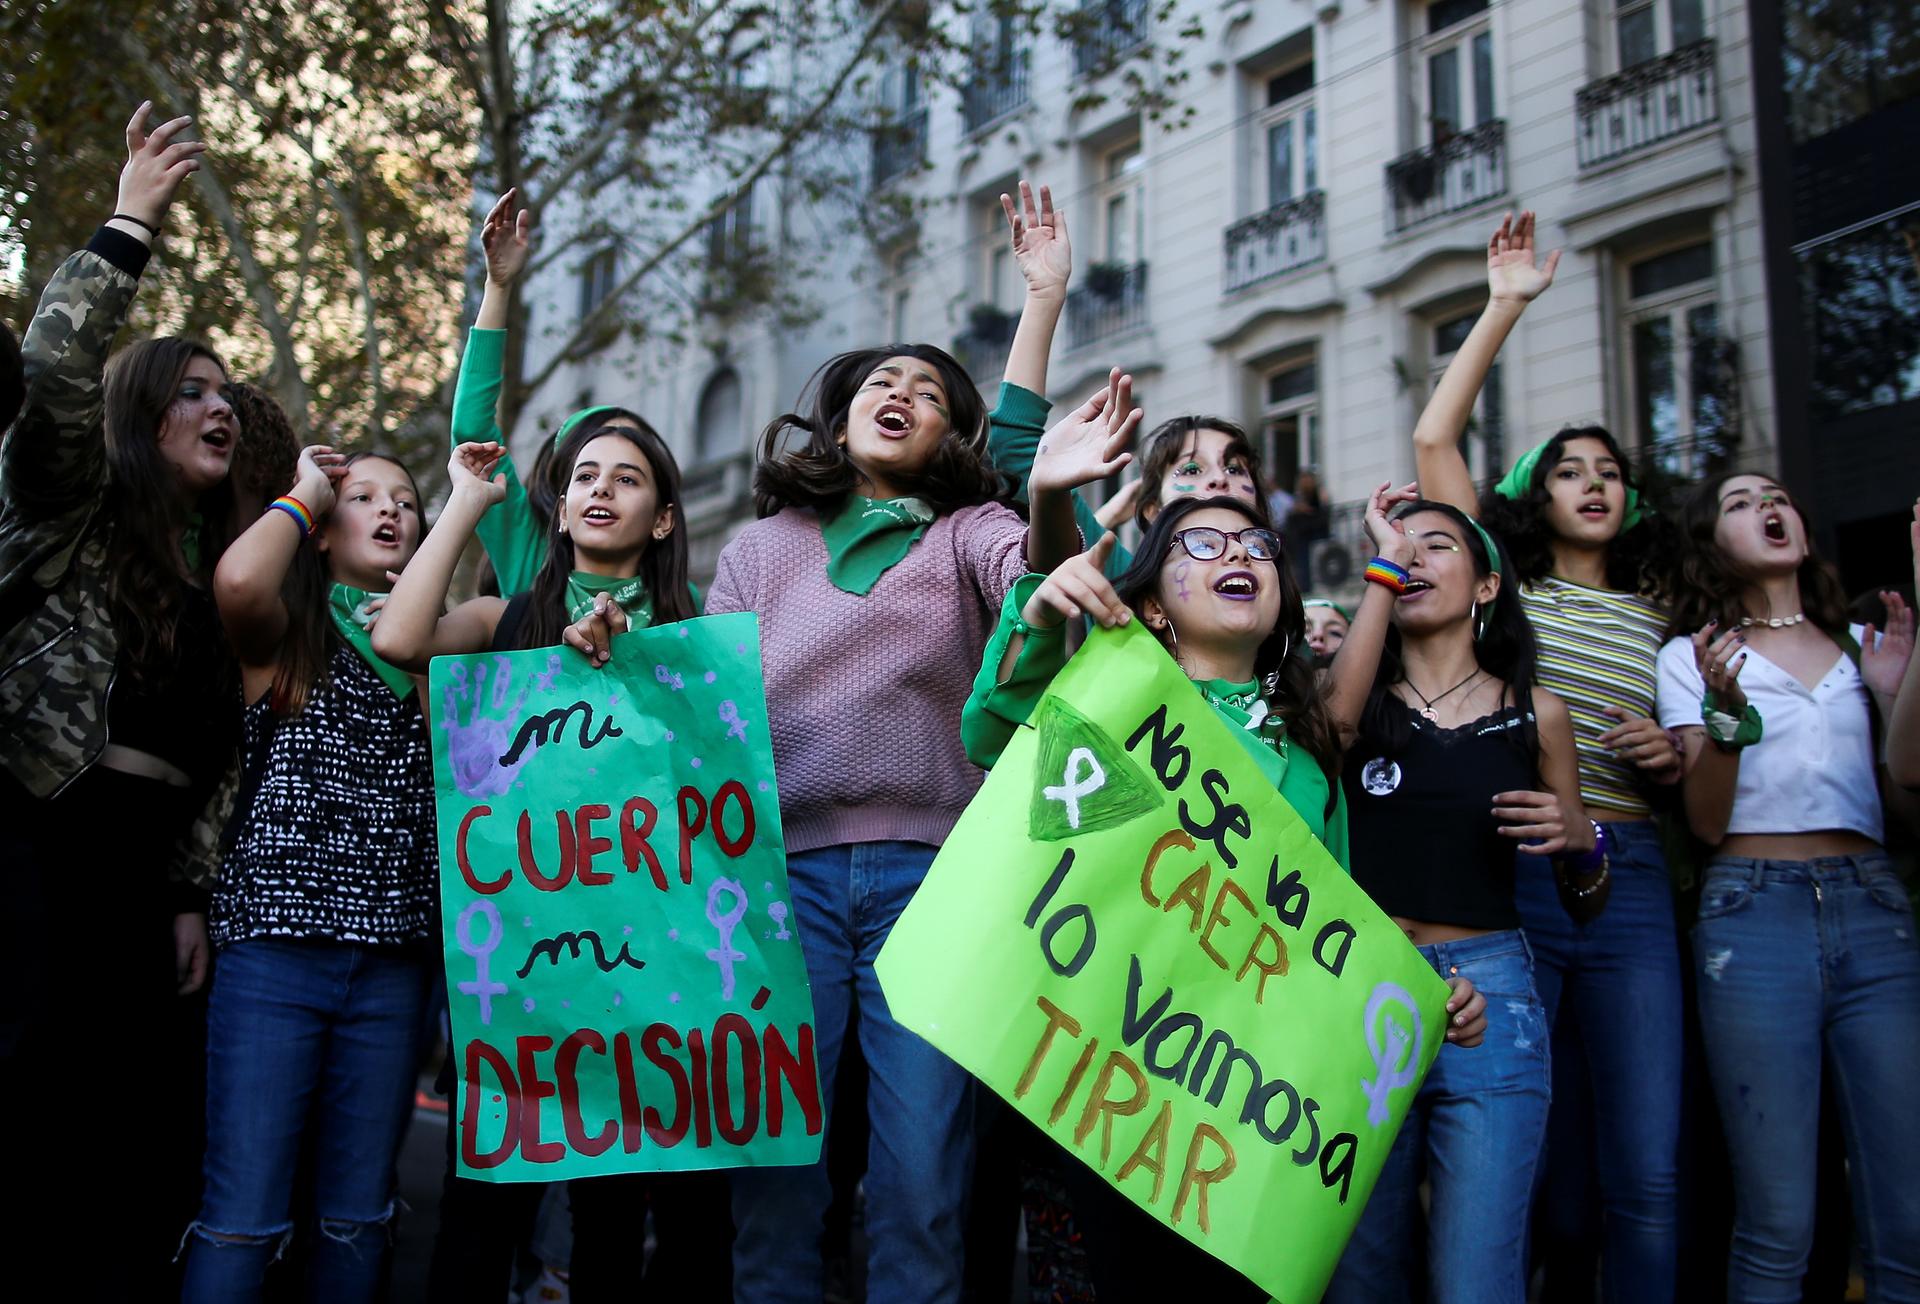 Women stand together and hold sings in Spanish in a city. 